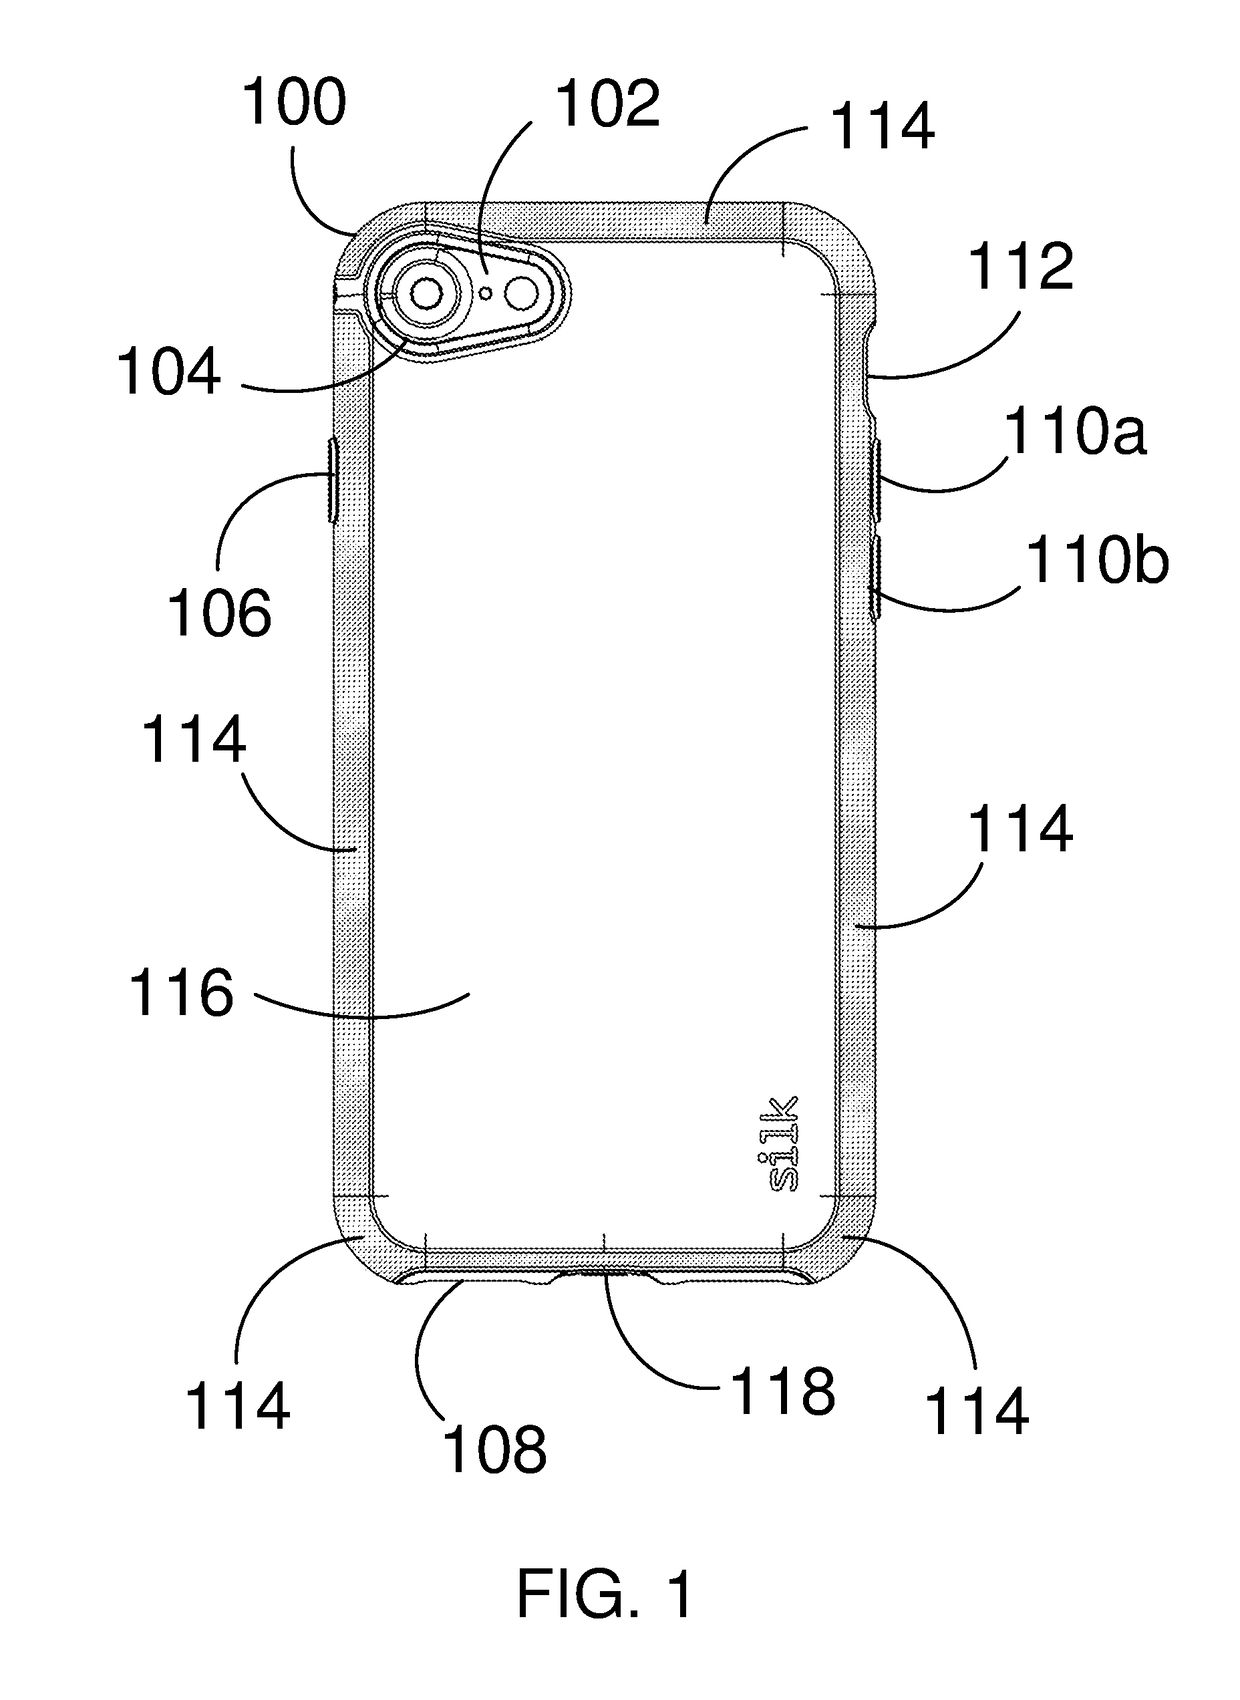 Mobile phone case with enhanced grip area and reduced grip area